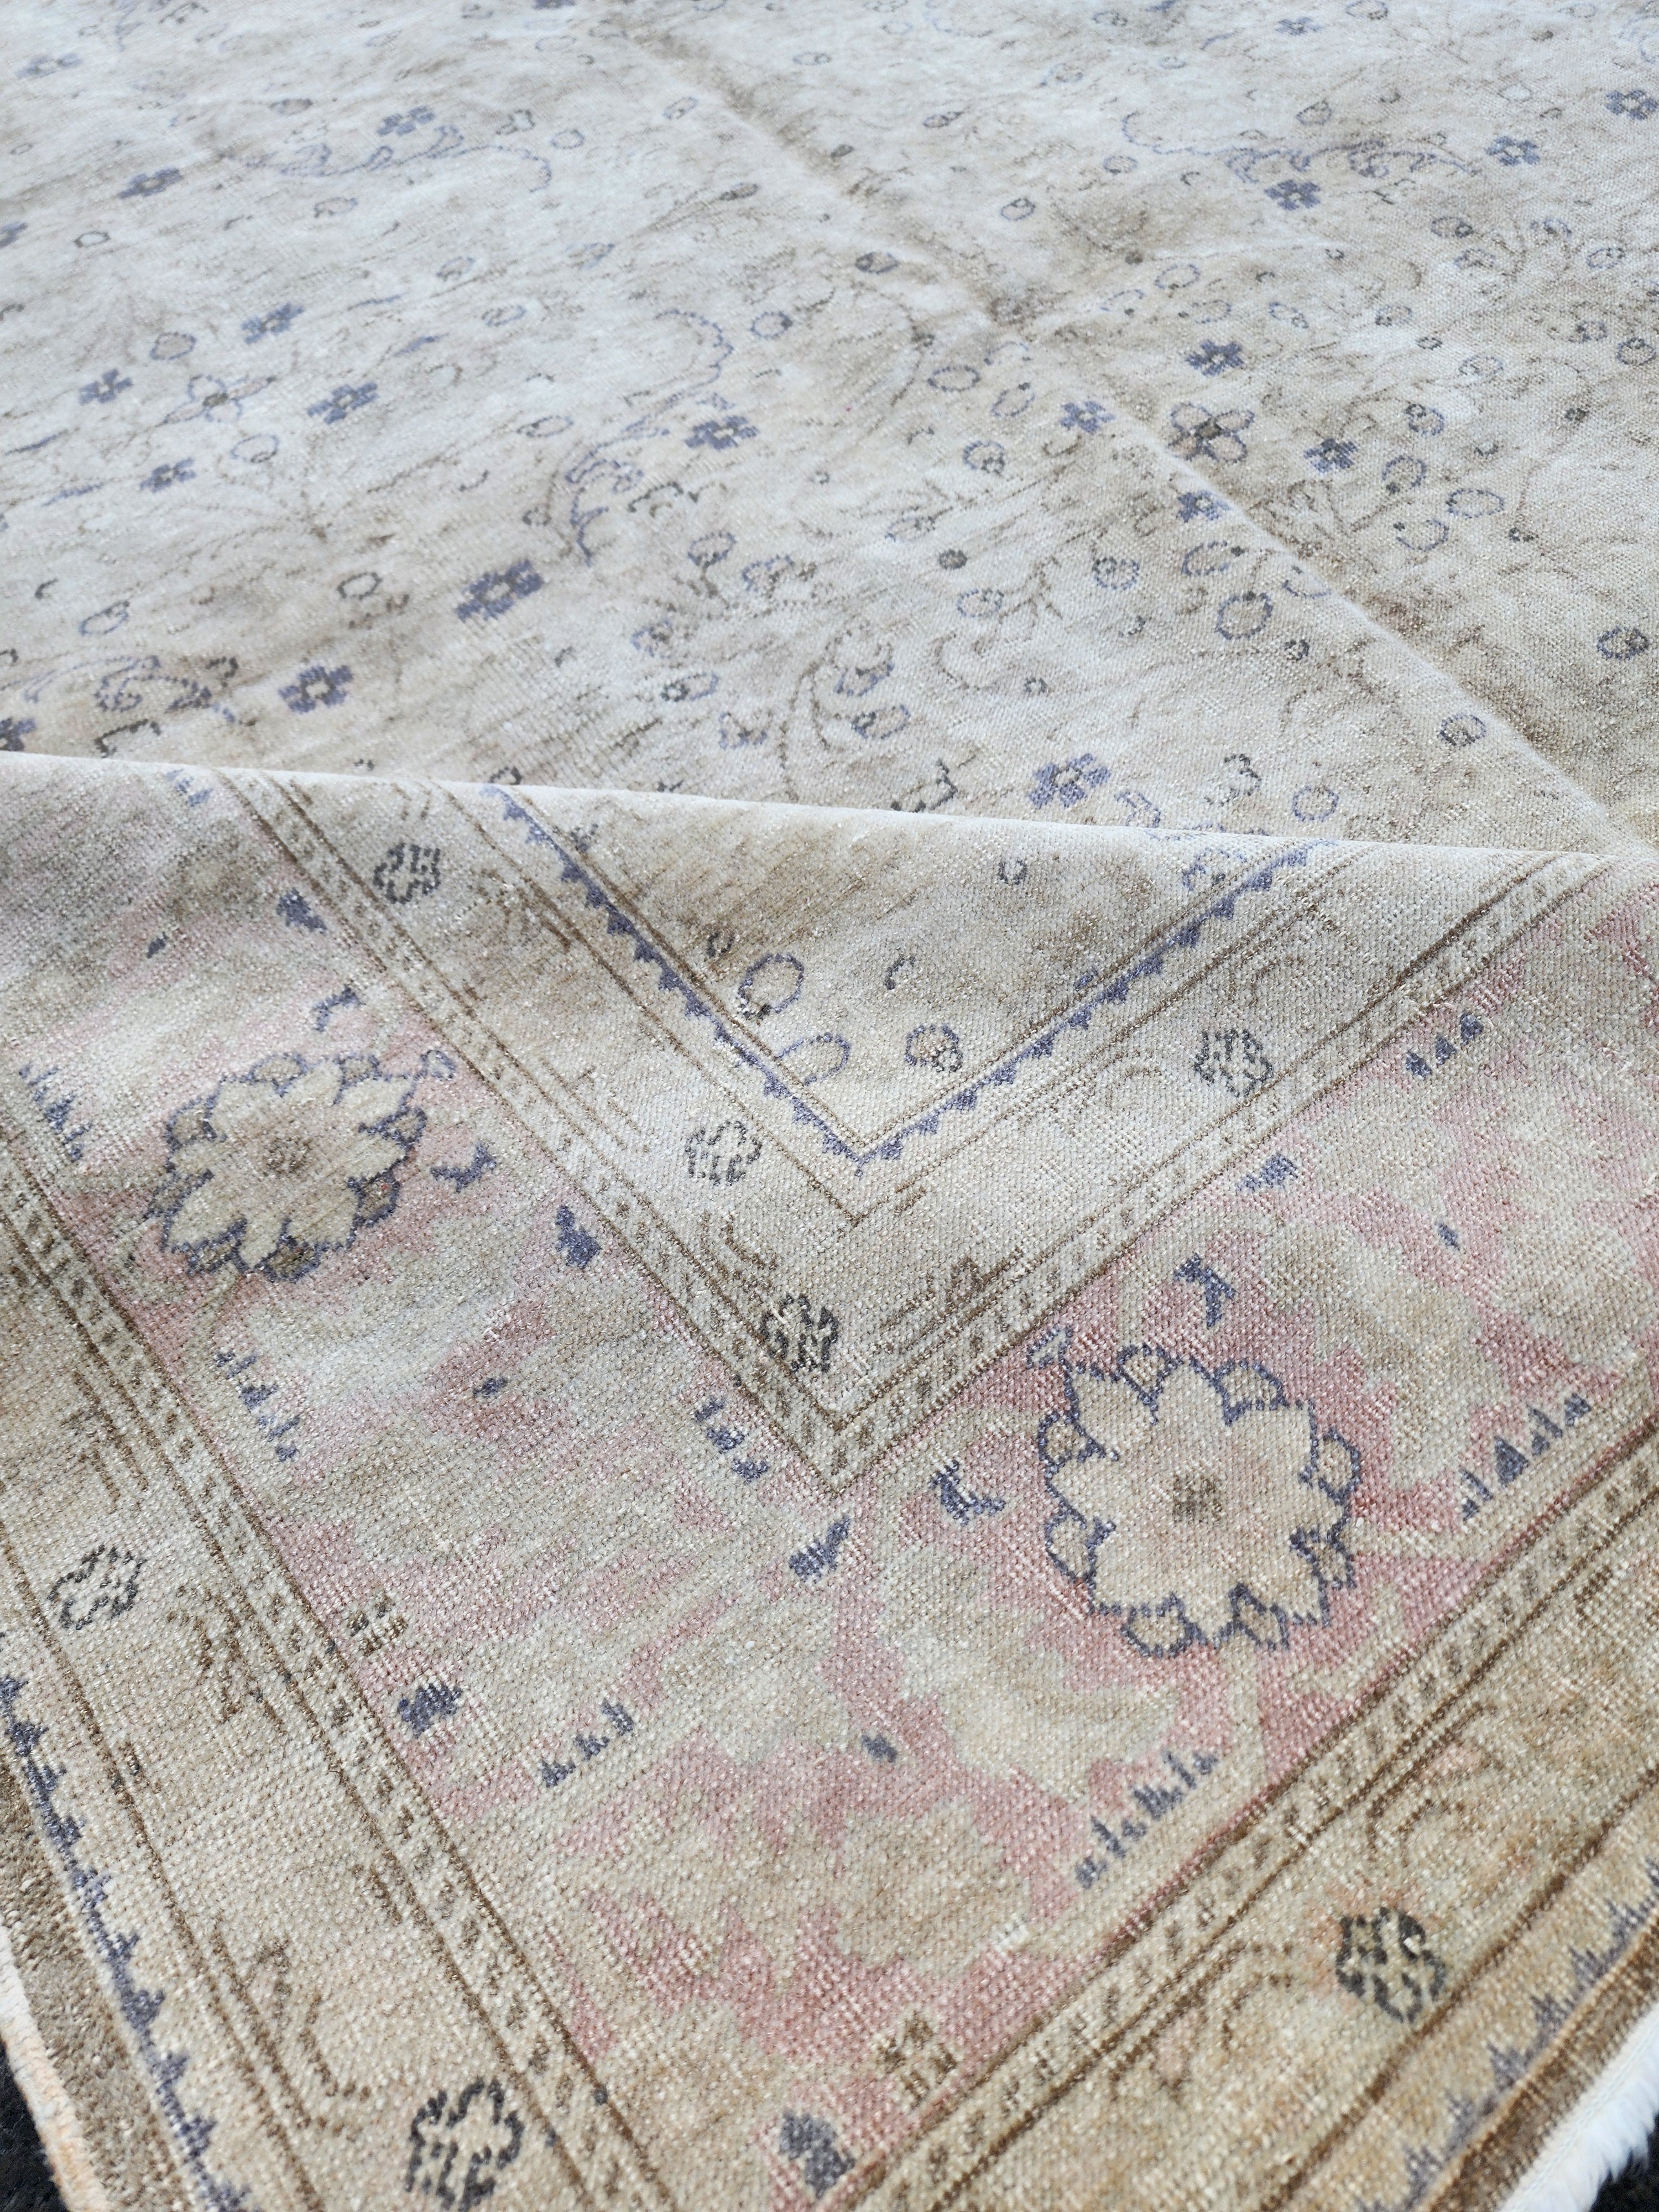 Pastel Turkish Rug 9 x 6 ft Vintage Antique Muted Pink Blue Overdyed Rug, Distressed Pale Oushak Rug Handmade Natural Wool Persian Area Rug